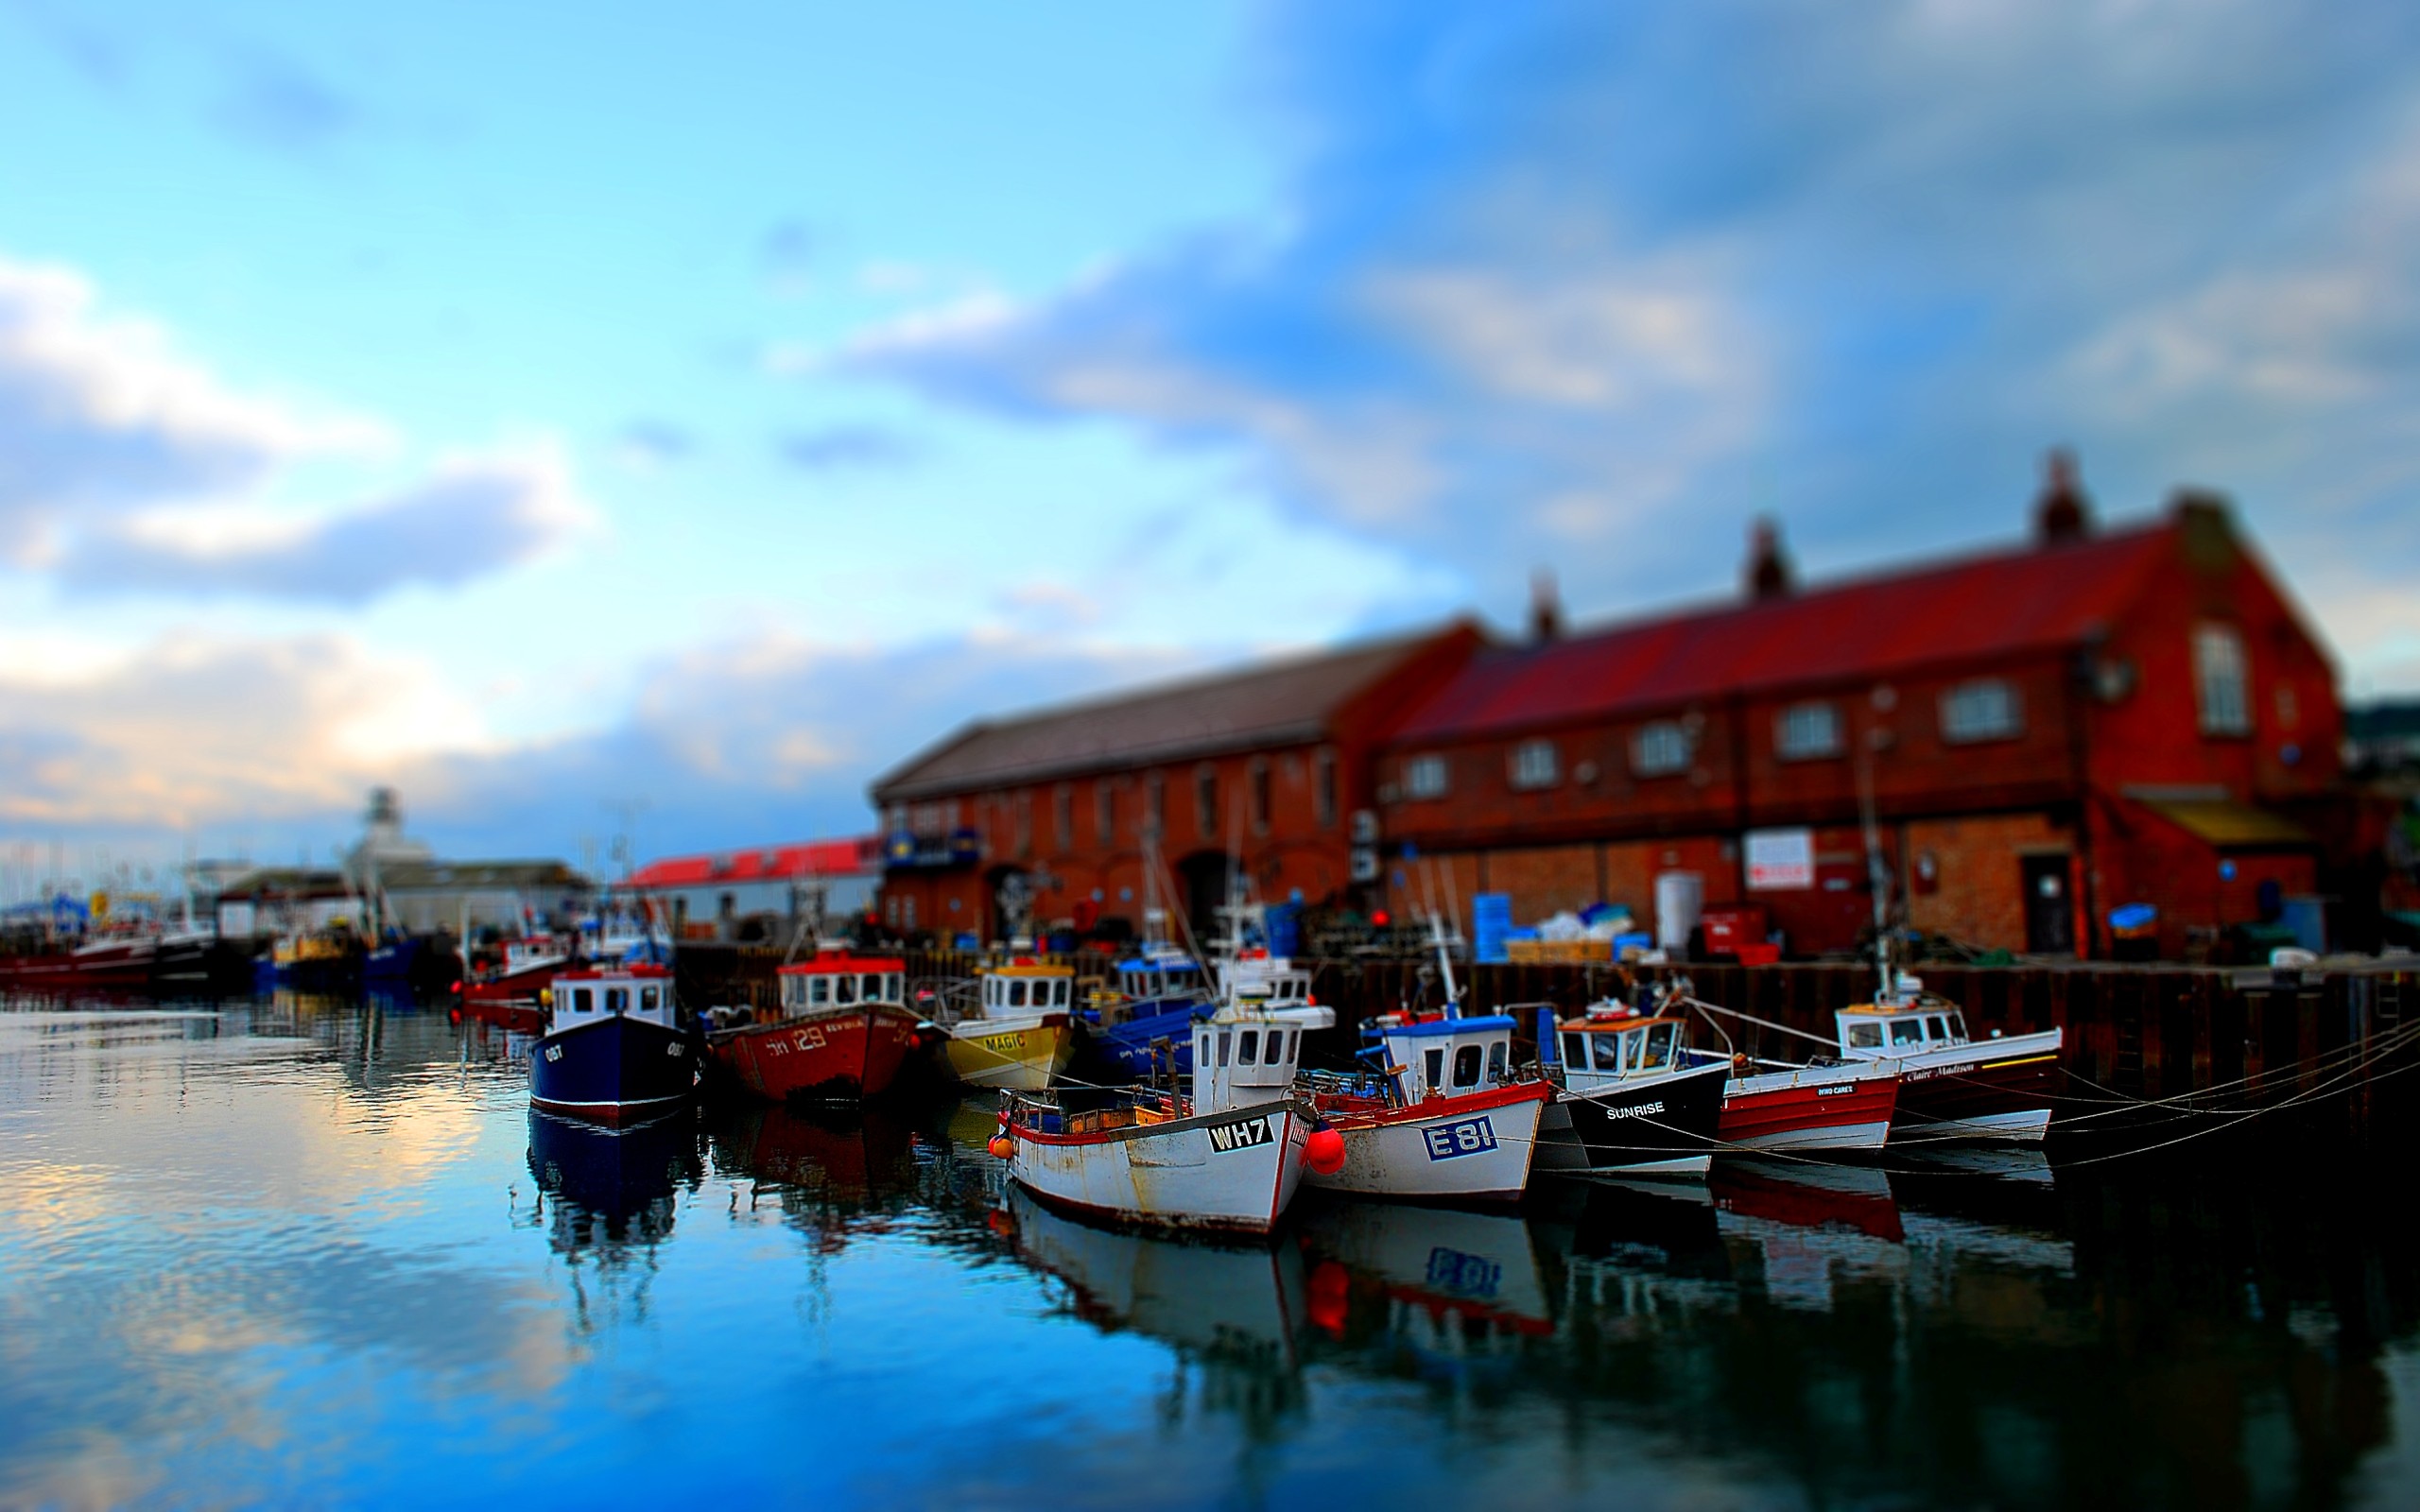 General 2560x1600 tilt shift boat coast building reflection harbor vehicle outdoors water numbers